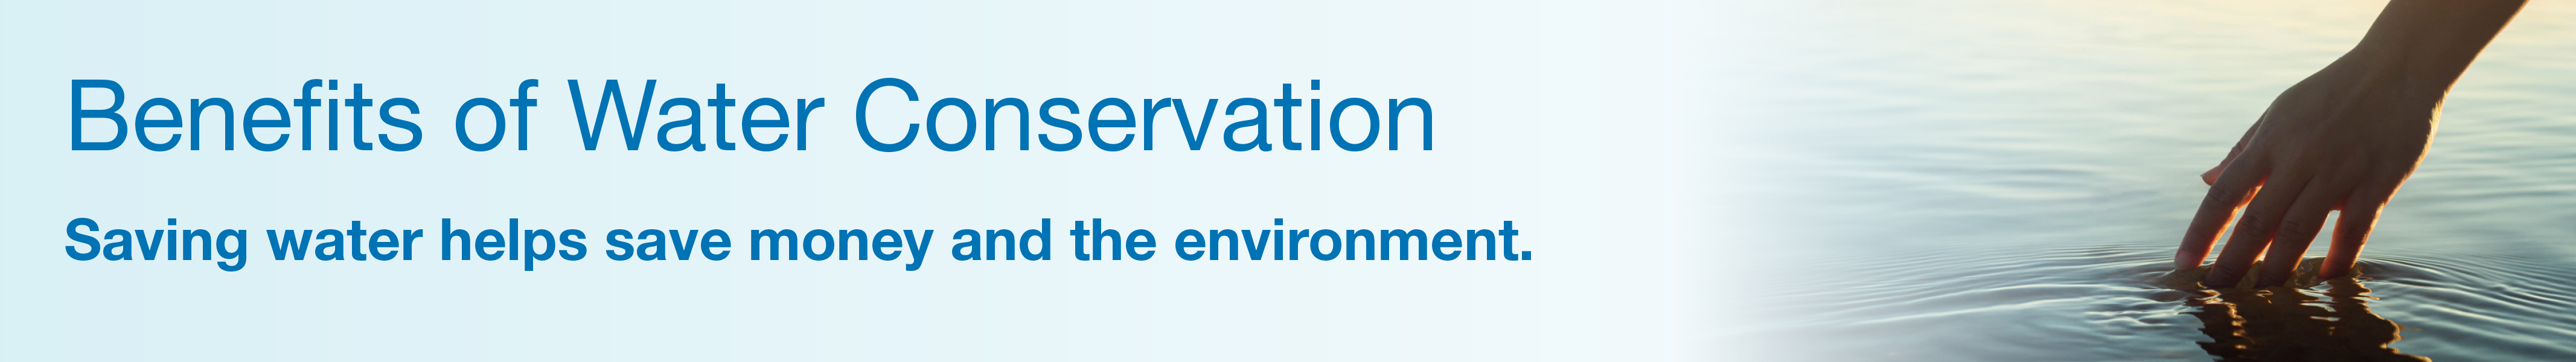 benefits of water conservation